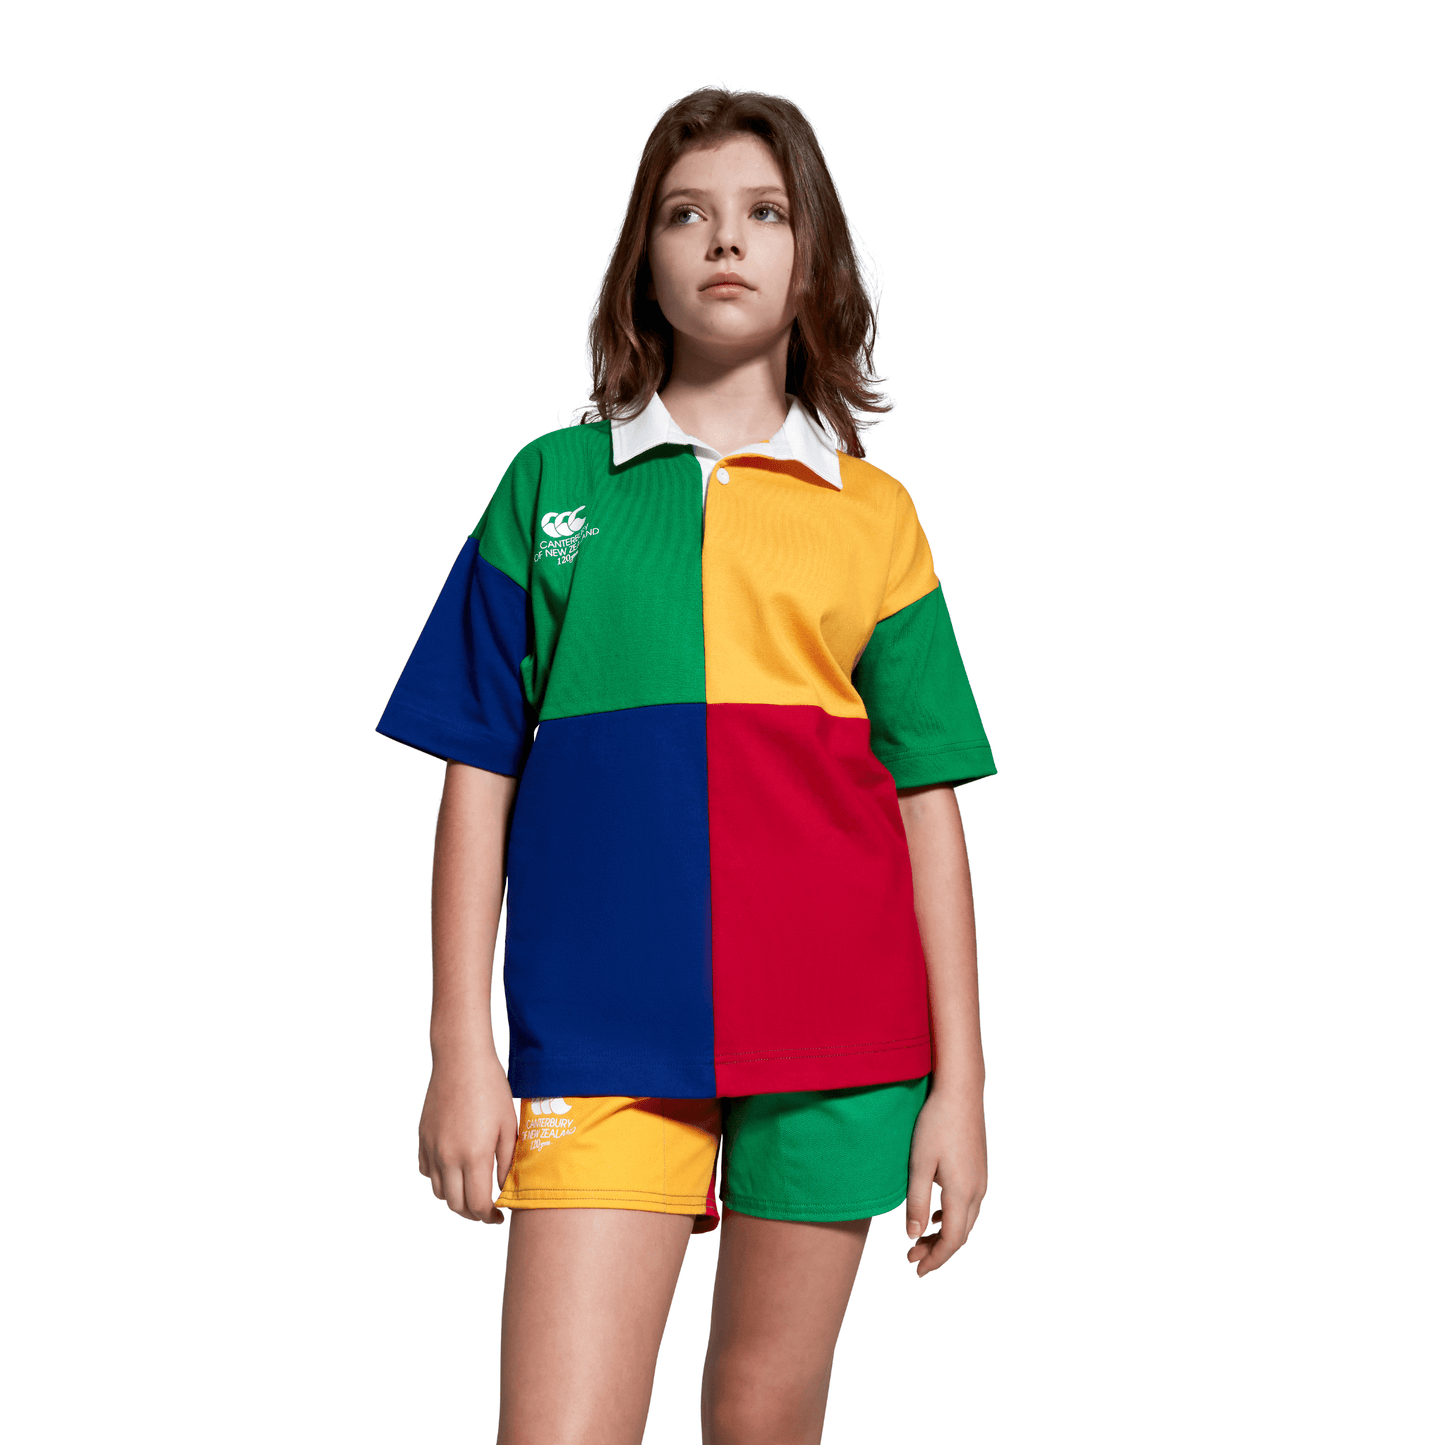 Limited-Edition Four Coloured Kids Canterbury Rugby Jersey and Harlequin Shorts. A part of the new 120 Years of Canterbury clothing range.